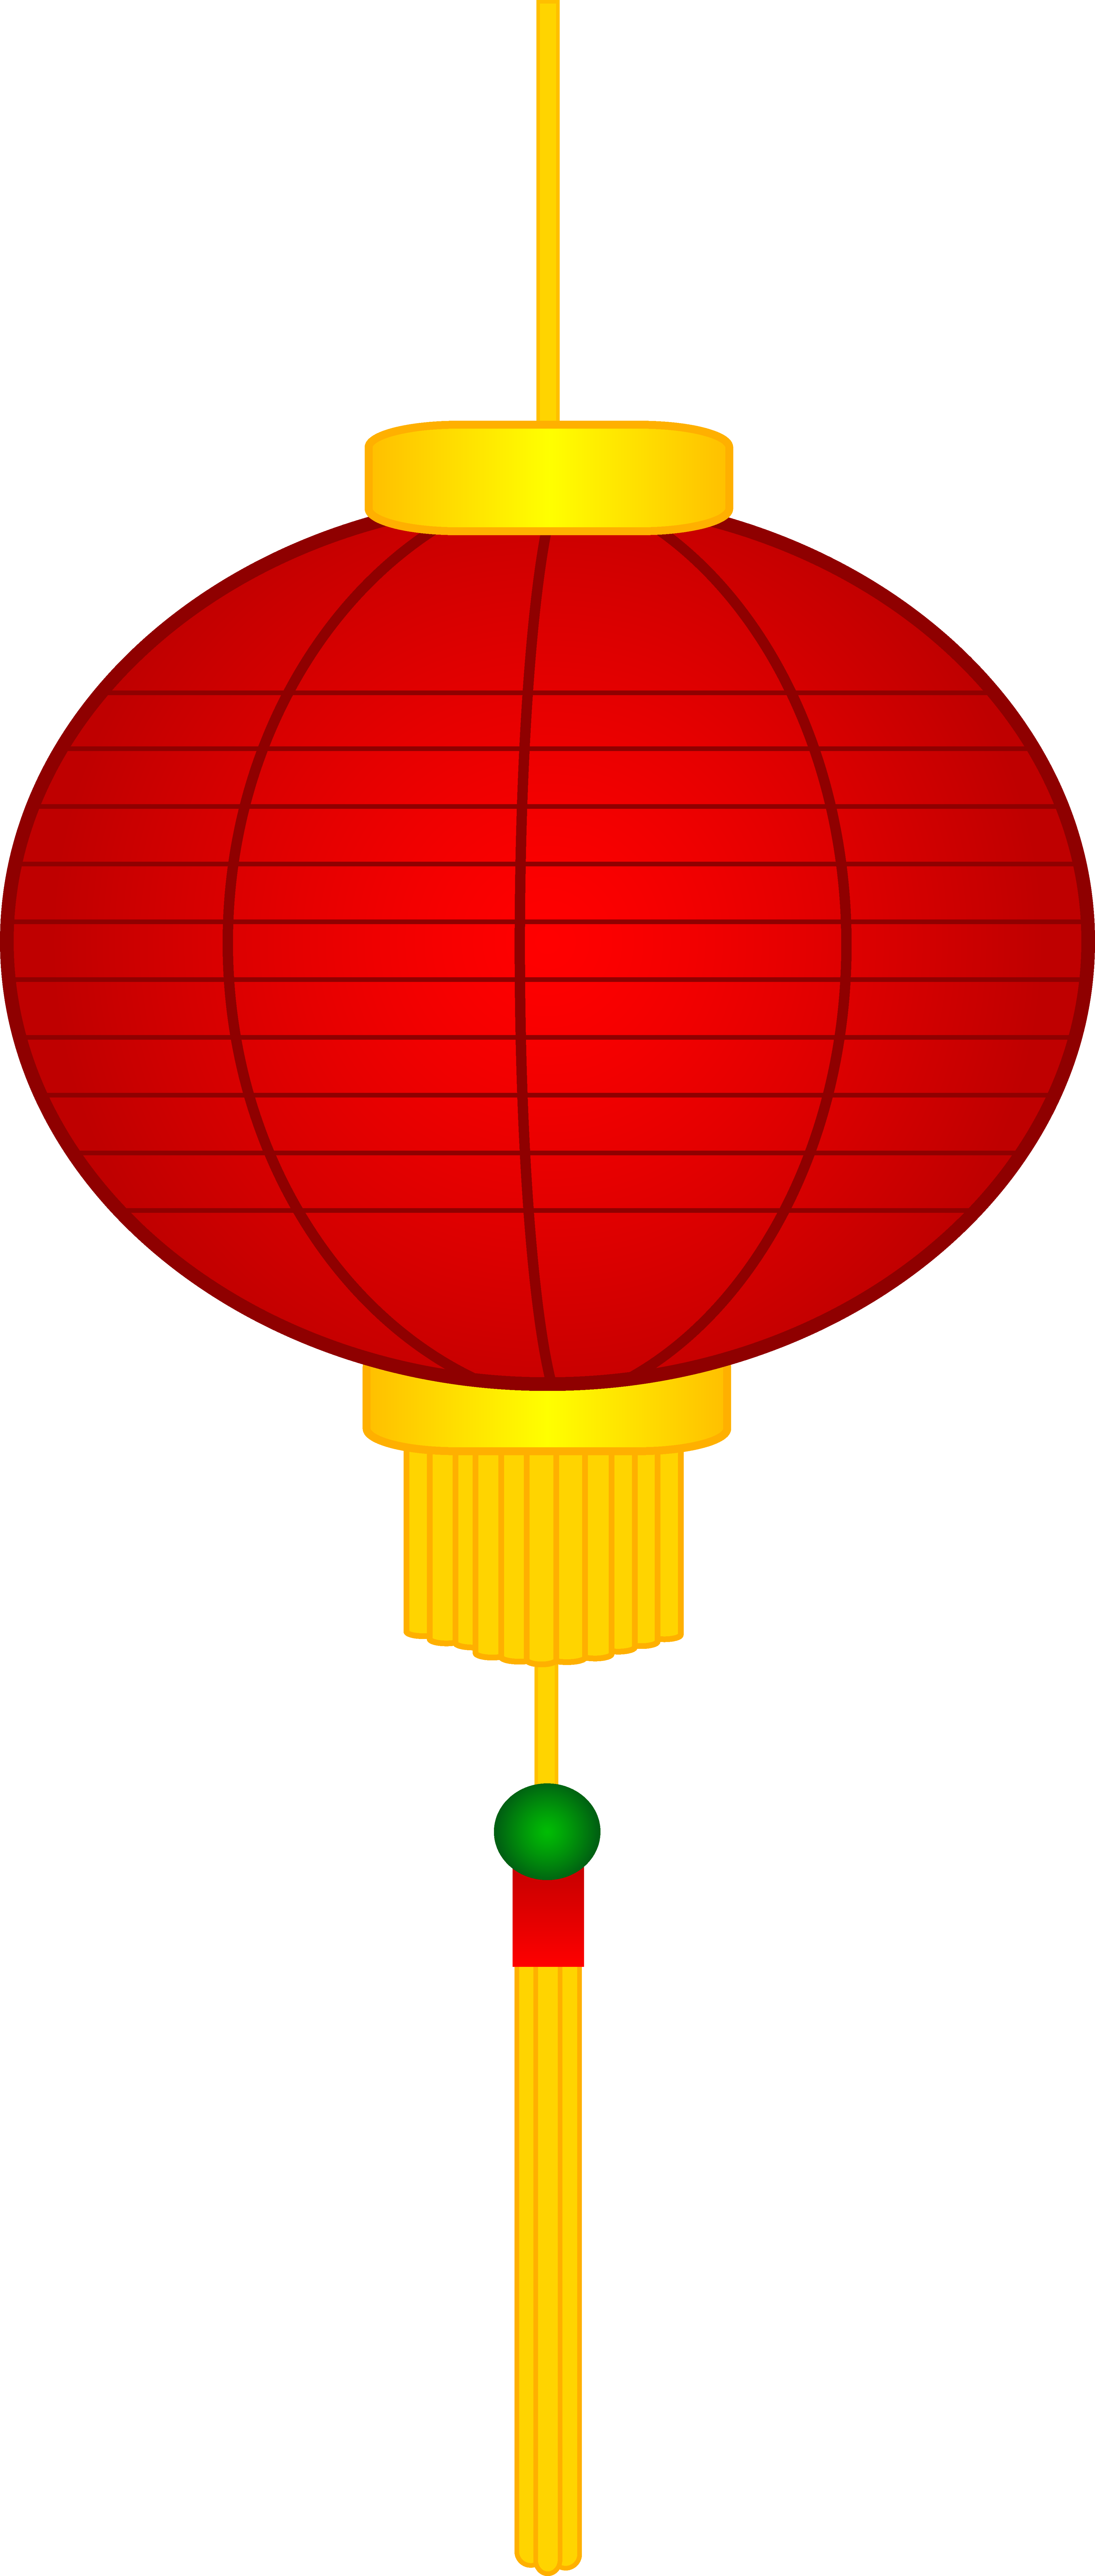 Chinese Lantern Clipart - Free to use Clip Art Resource